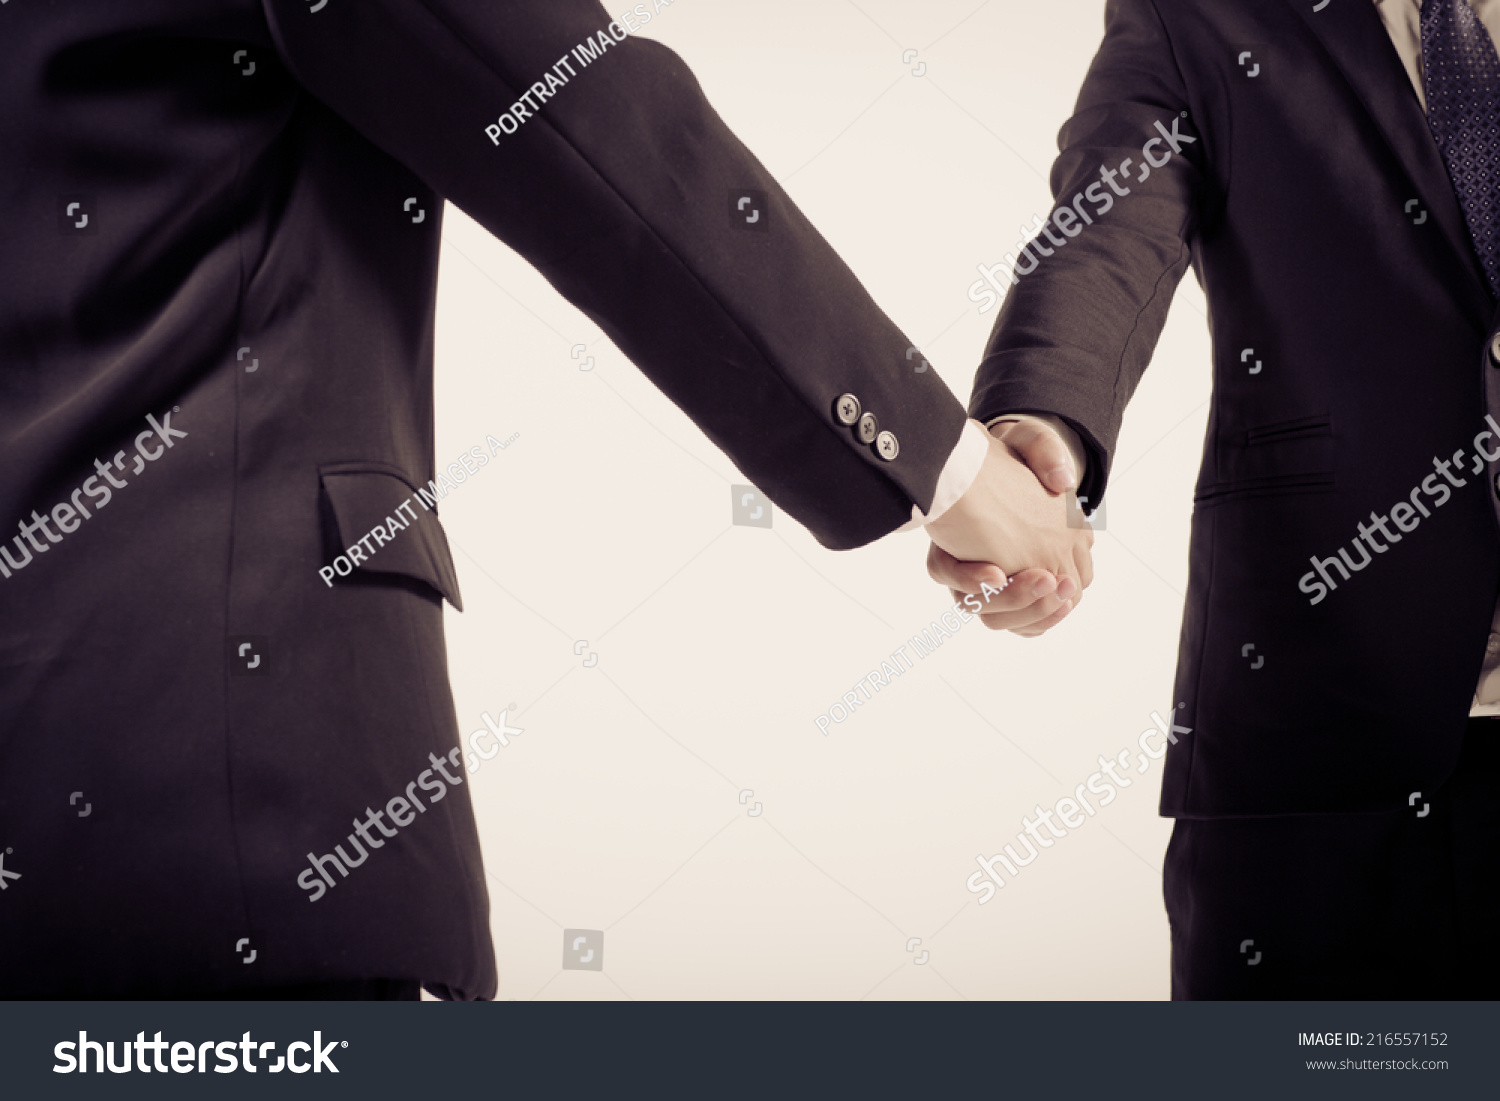 Two business people shaking hands. Isolated on white background. #216557152